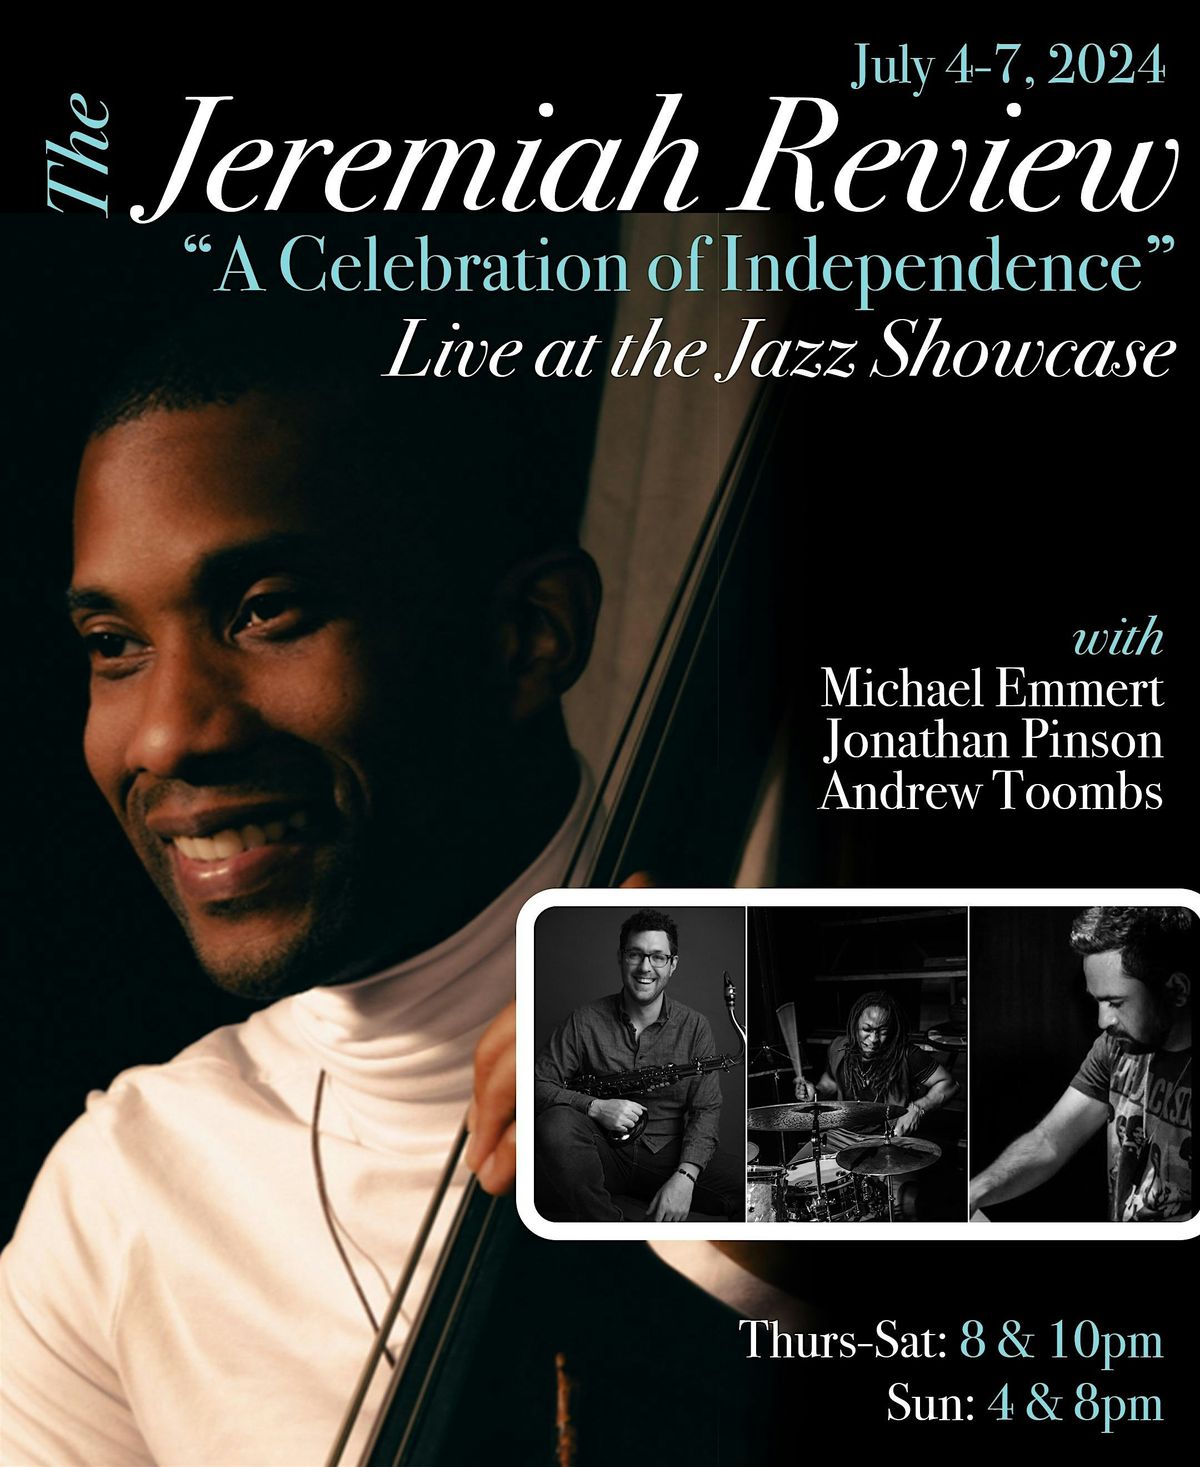 The Jeremiah Review "A Celebration of Independence"